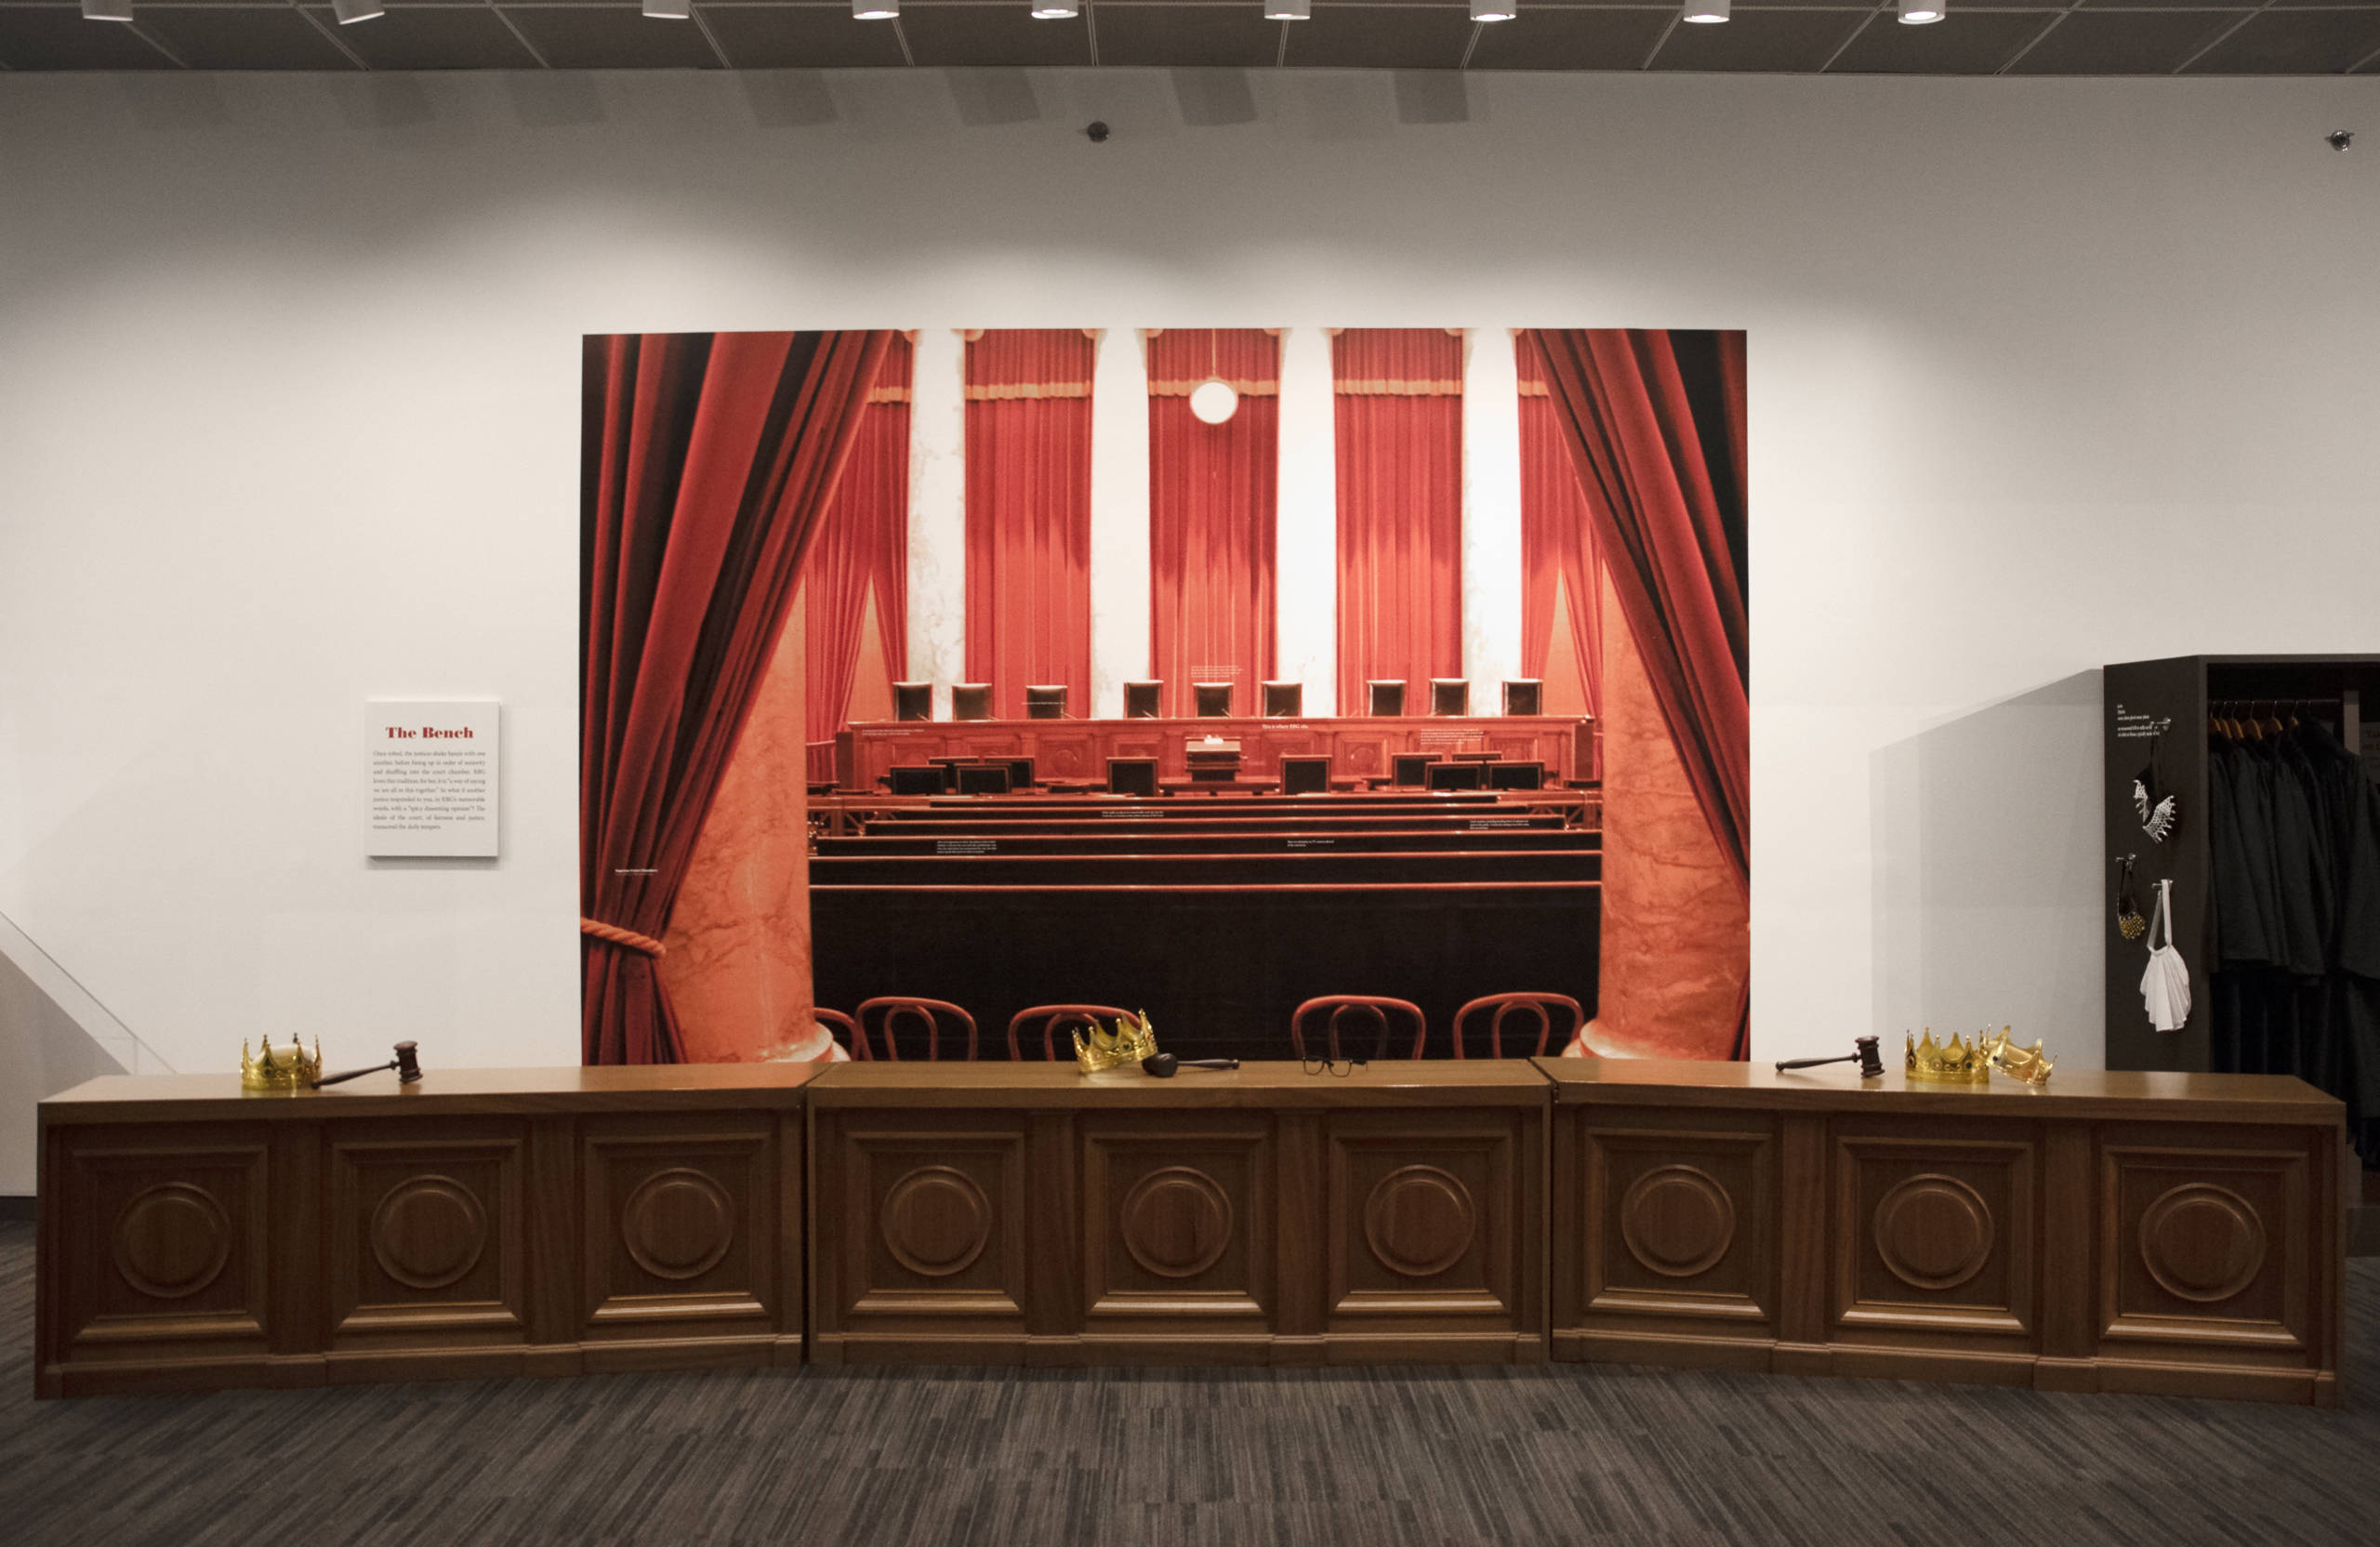 Installation view of Notorious RBG at the National Museum of American Jewish History